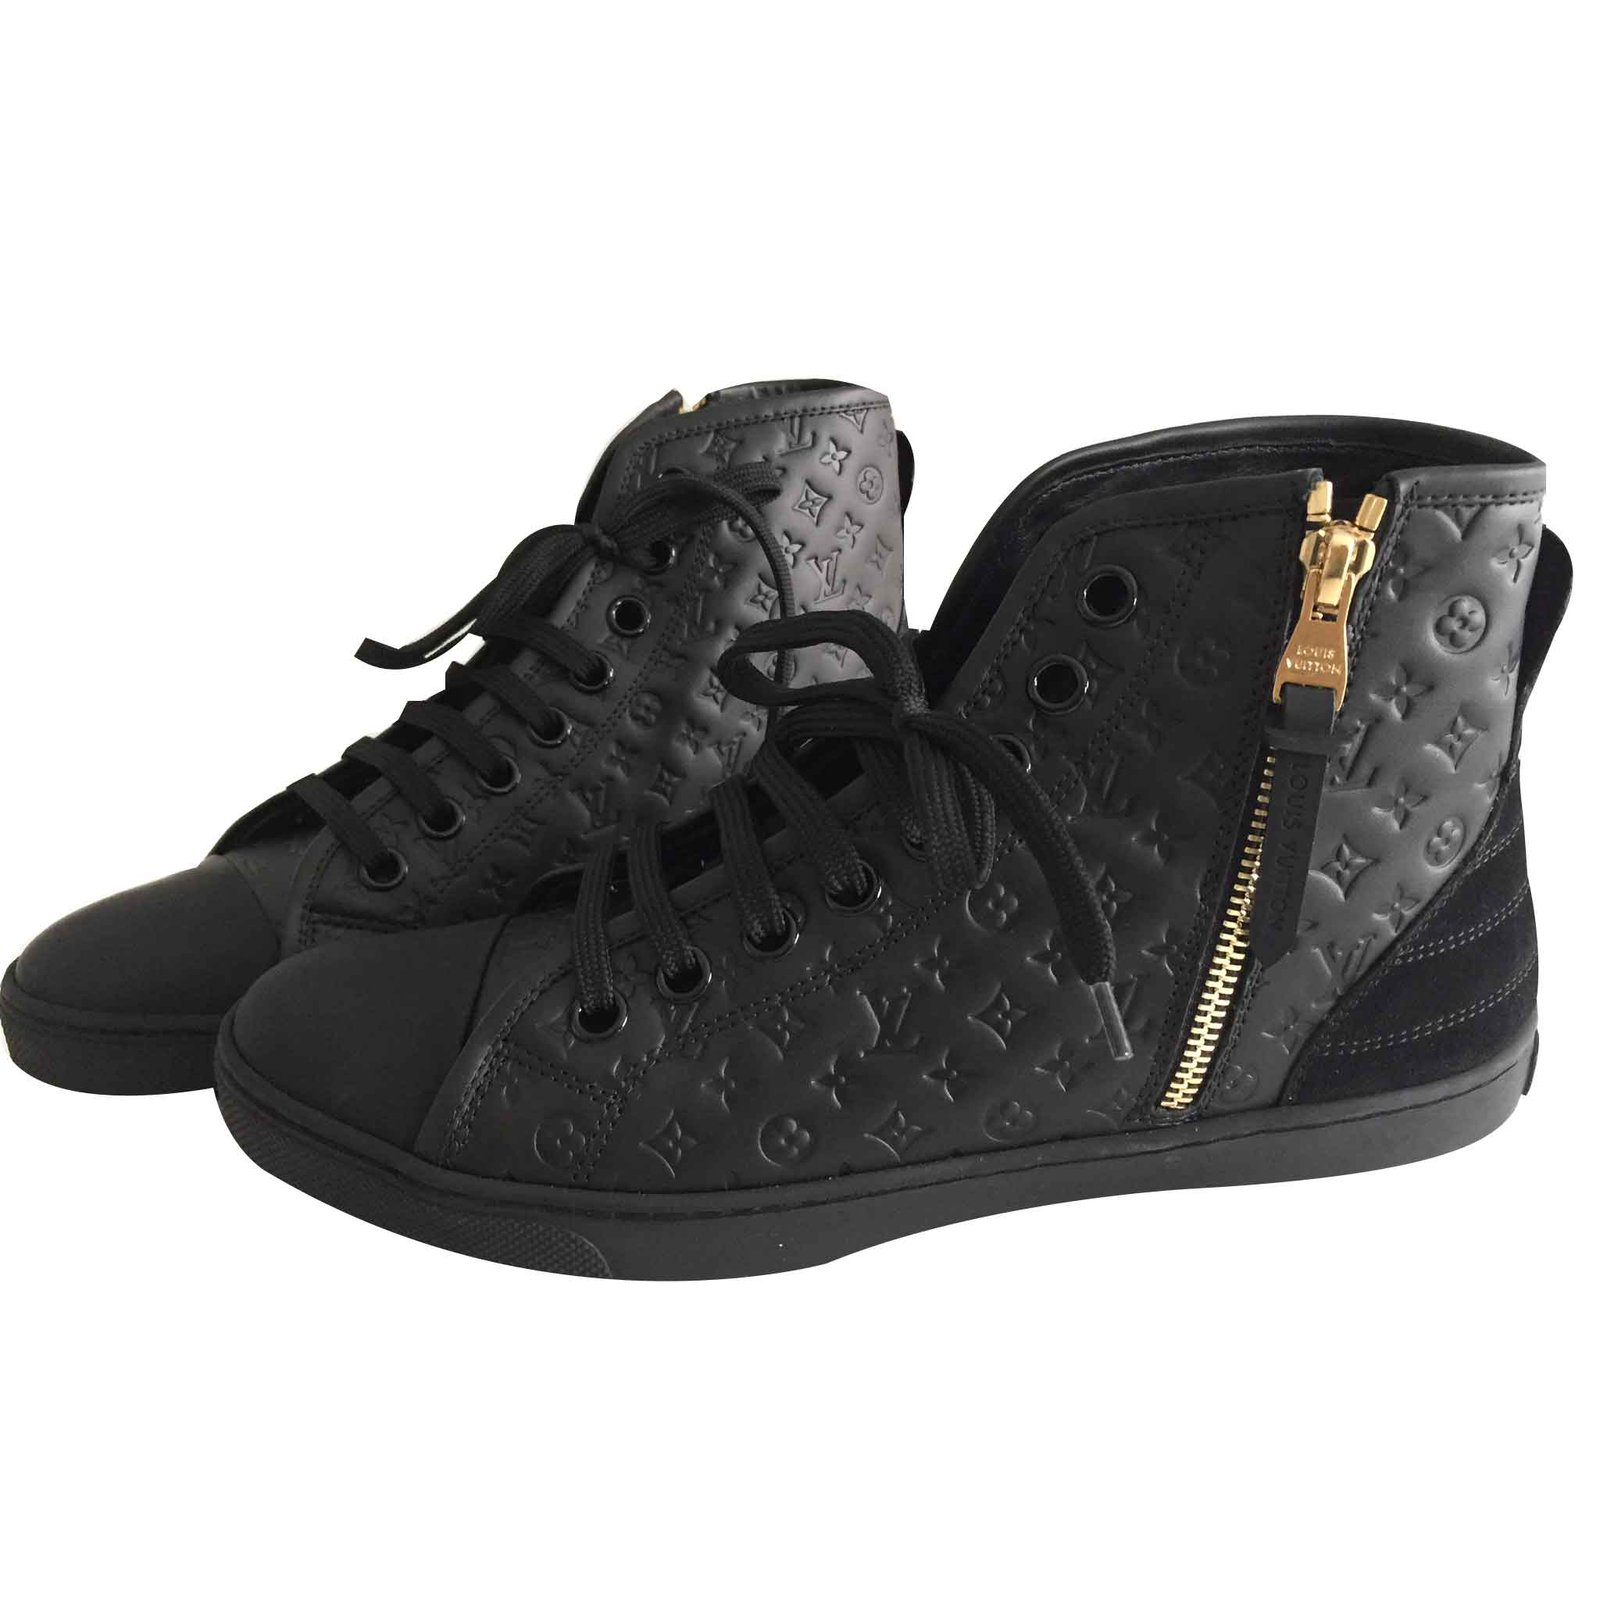 Louis Vuitton Black Leather Punchy High-Top Sneakers Size 7.5/38 - Yoogi's  Closet